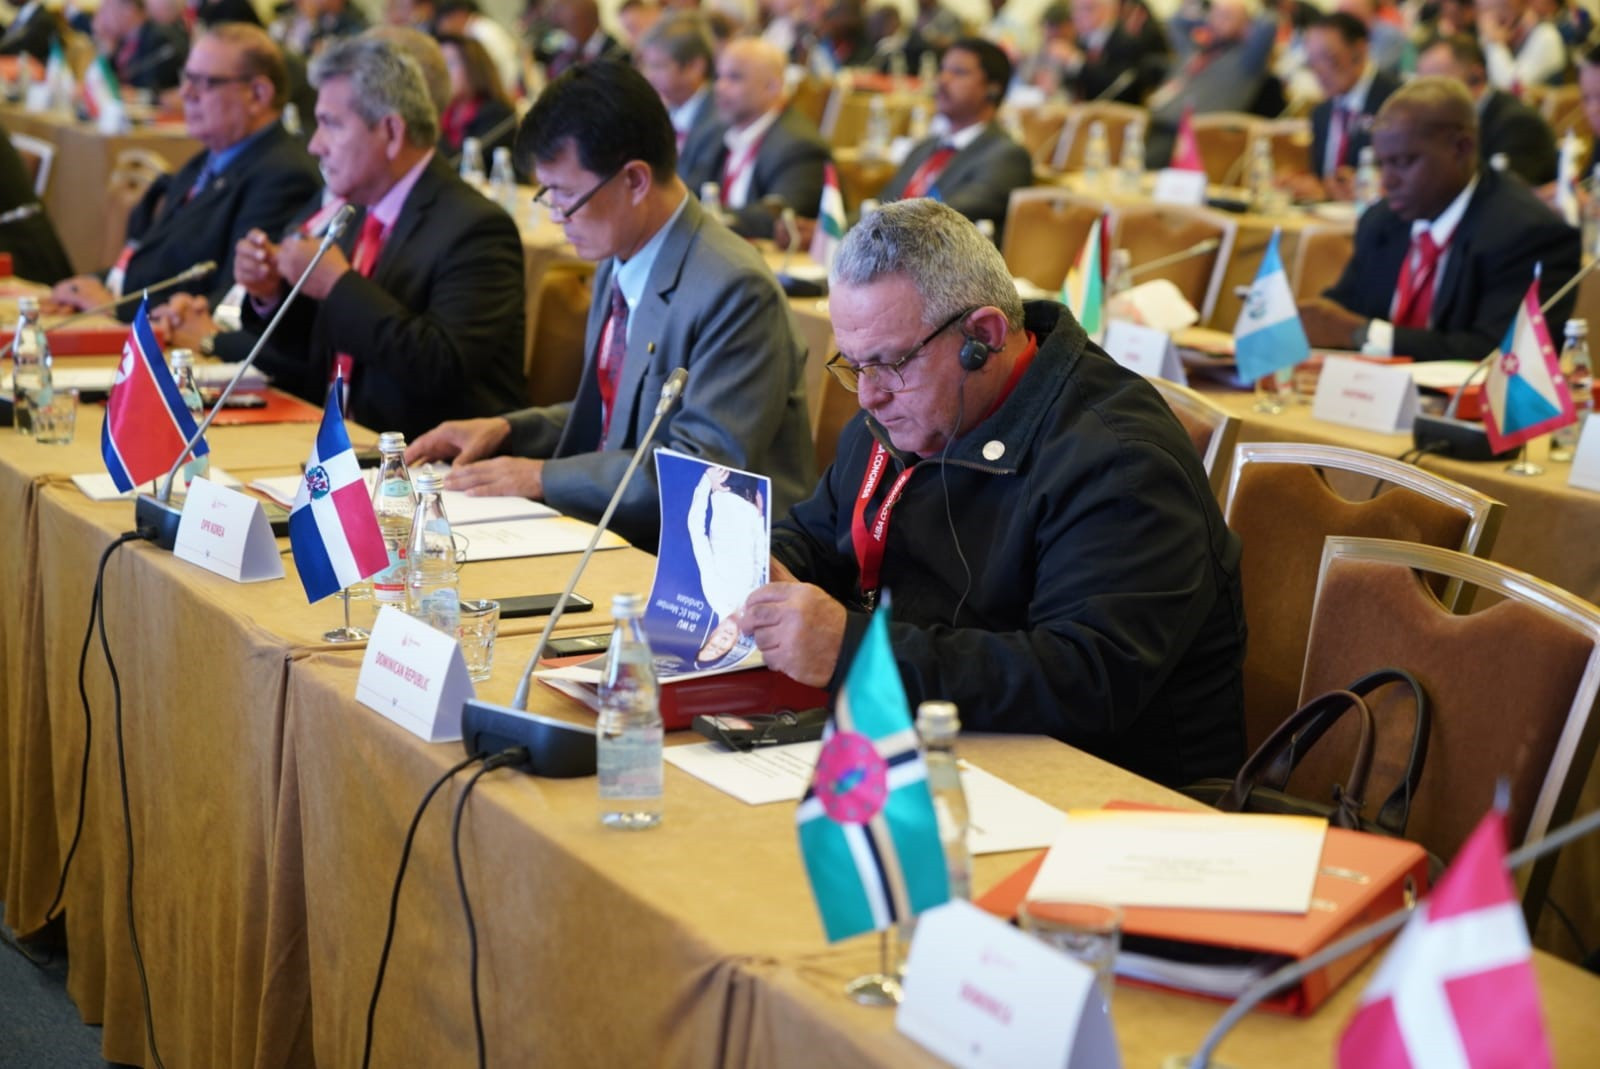 A delegate reads the election manifesto of AIBA Interim President Gafur Rakhimov, who is seeking the position on a permanent basis ©AIBA